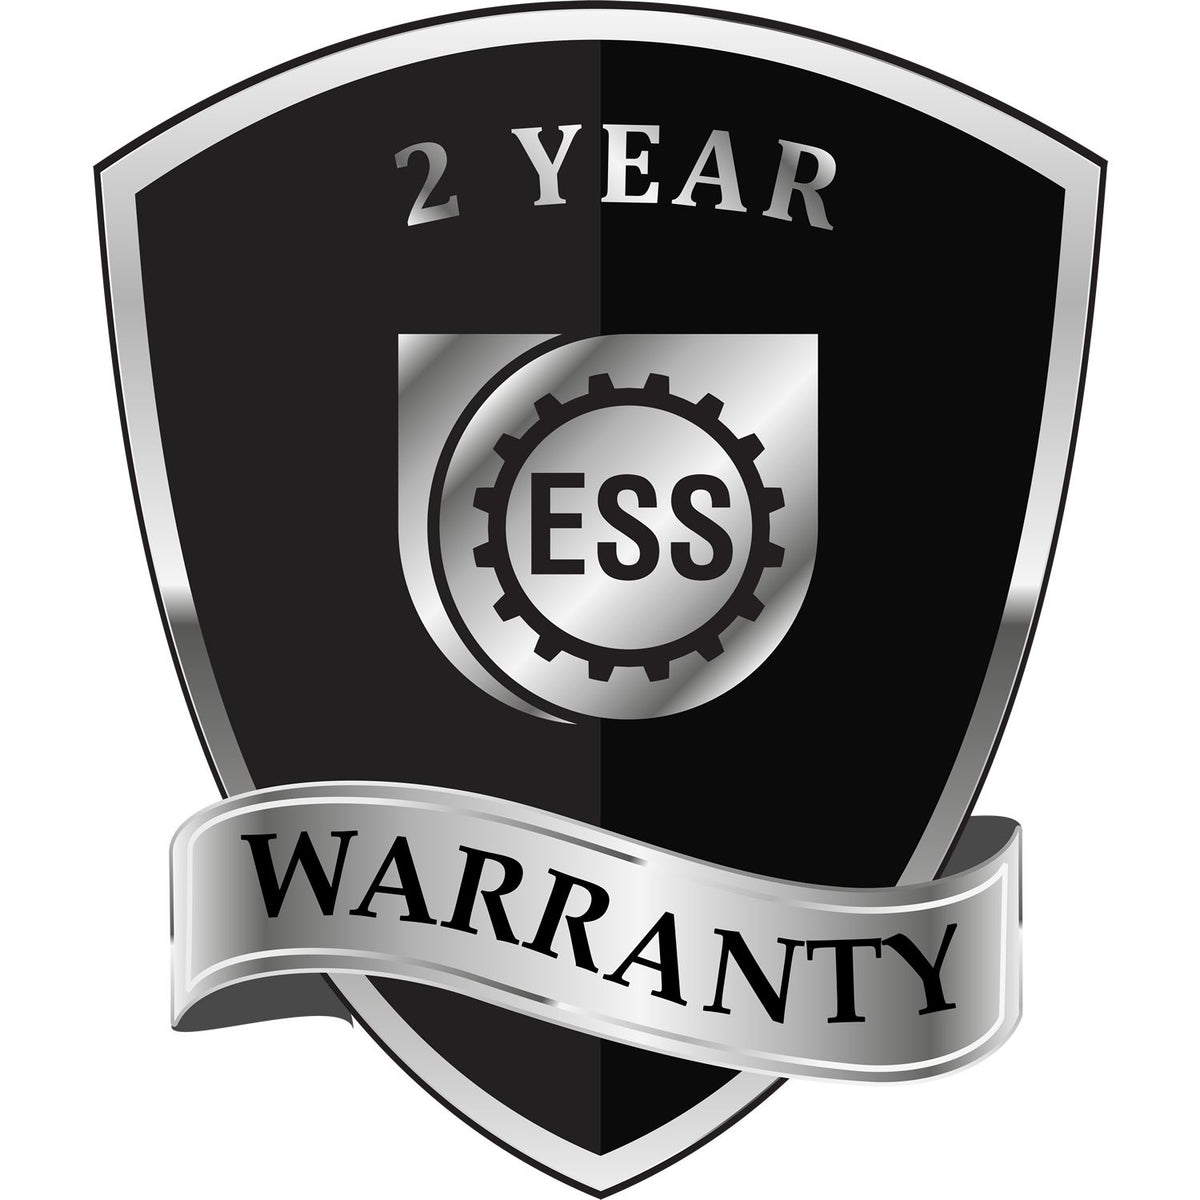 A badge or emblem showing a warranty icon for the Extended Long Reach Mississippi Architect Seal Embosser